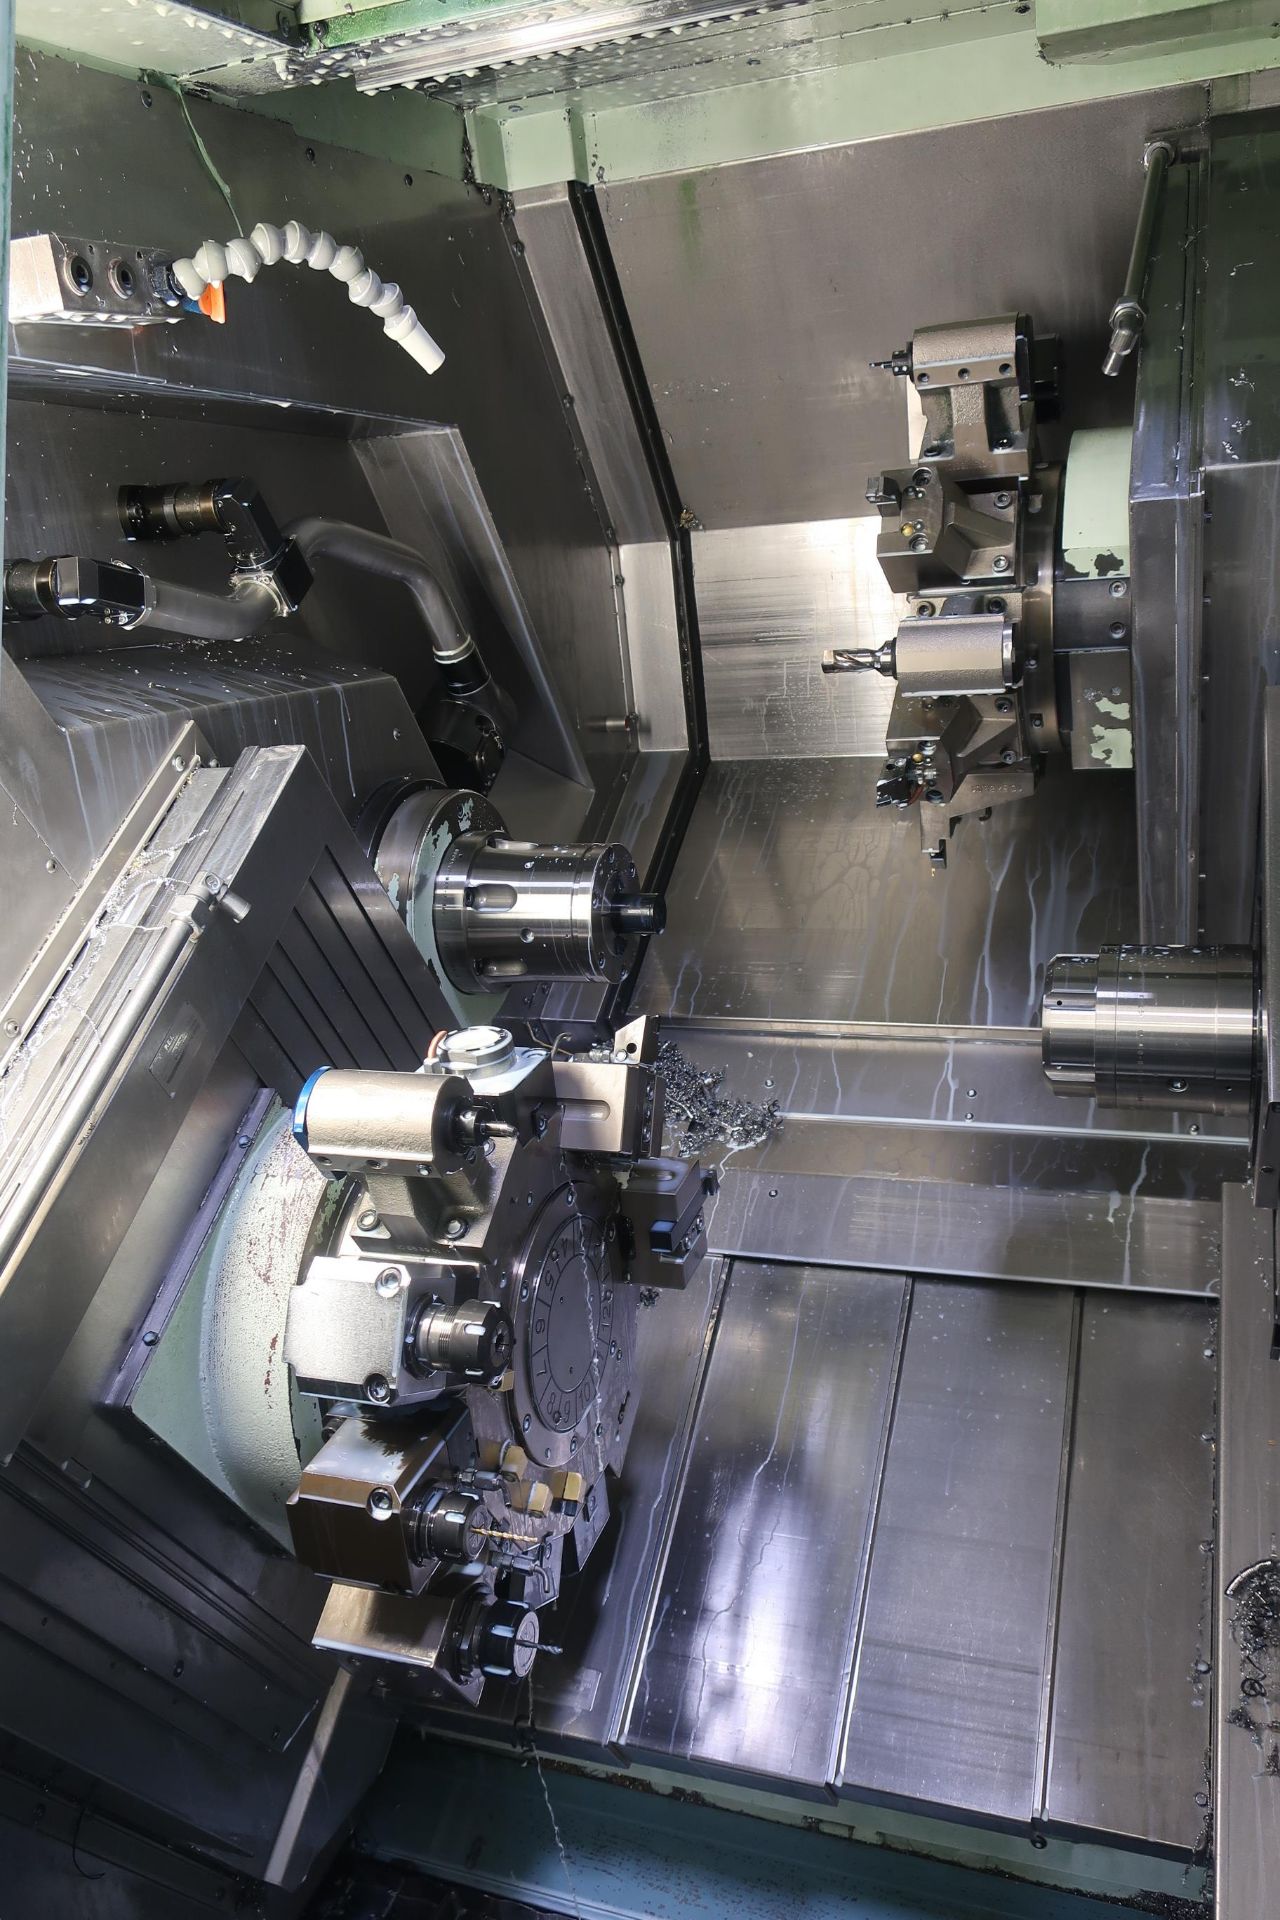 EUROTECH B465 Y2 QUATROFLEX TWIN SPINDLE TWIN TURRET CNC LATHE W/DUAL Y-AXIS, NEW 2011, SN 11129 - Image 3 of 19